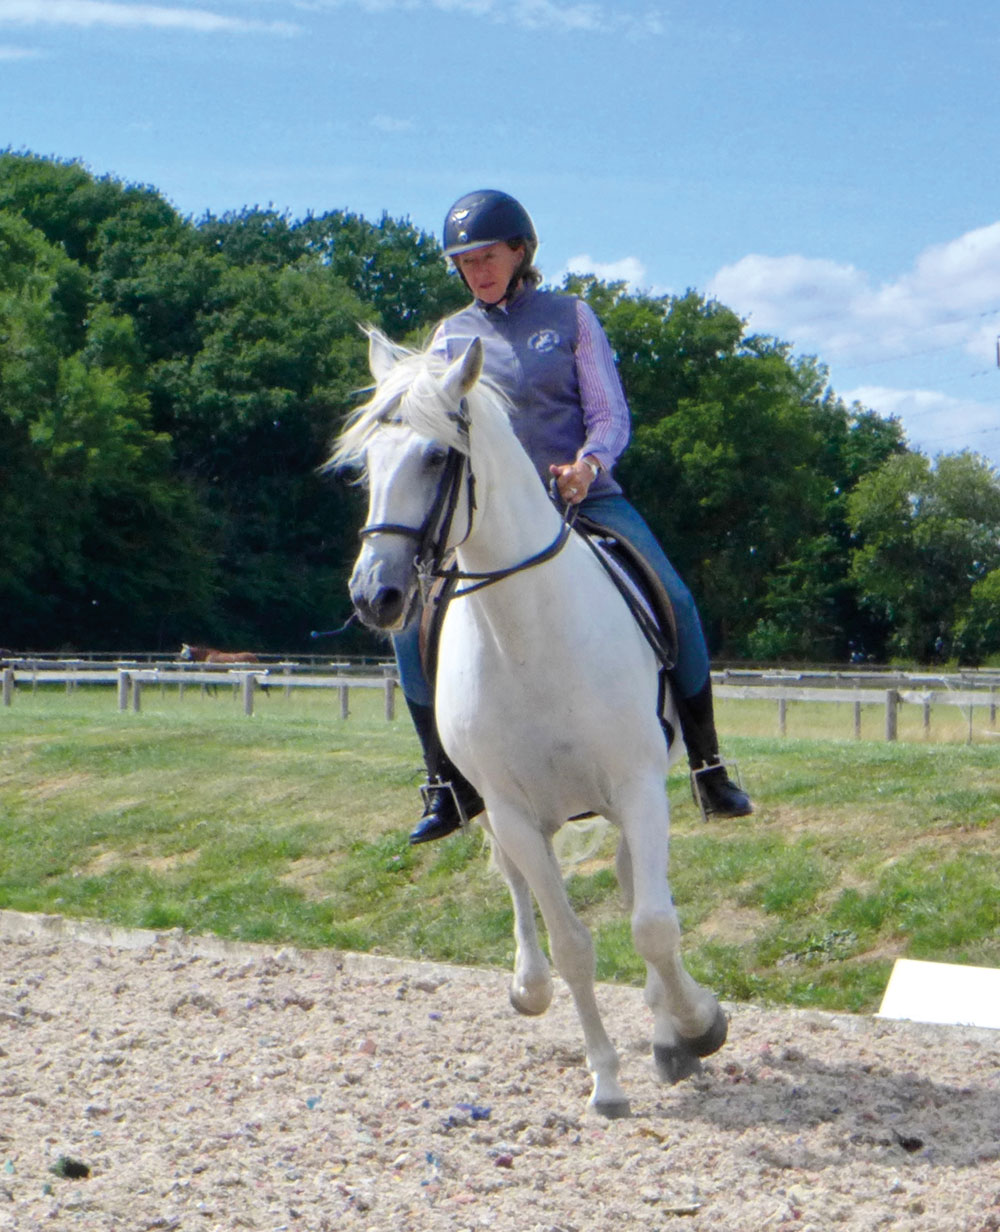 Horse and rider canter transition